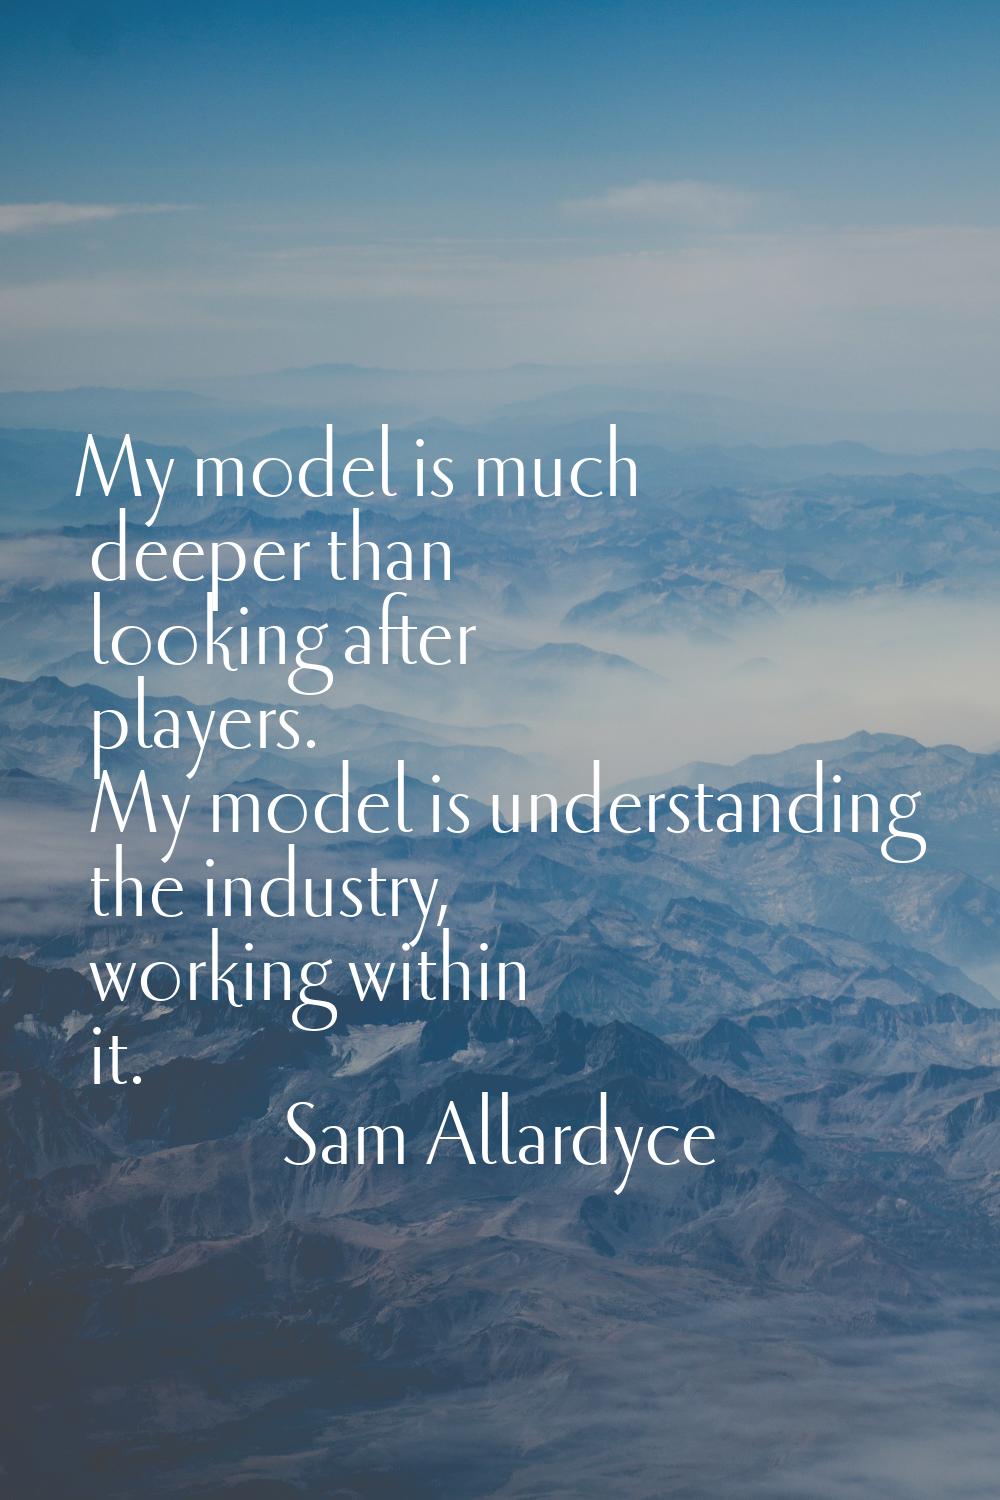 My model is much deeper than looking after players. My model is understanding the industry, working